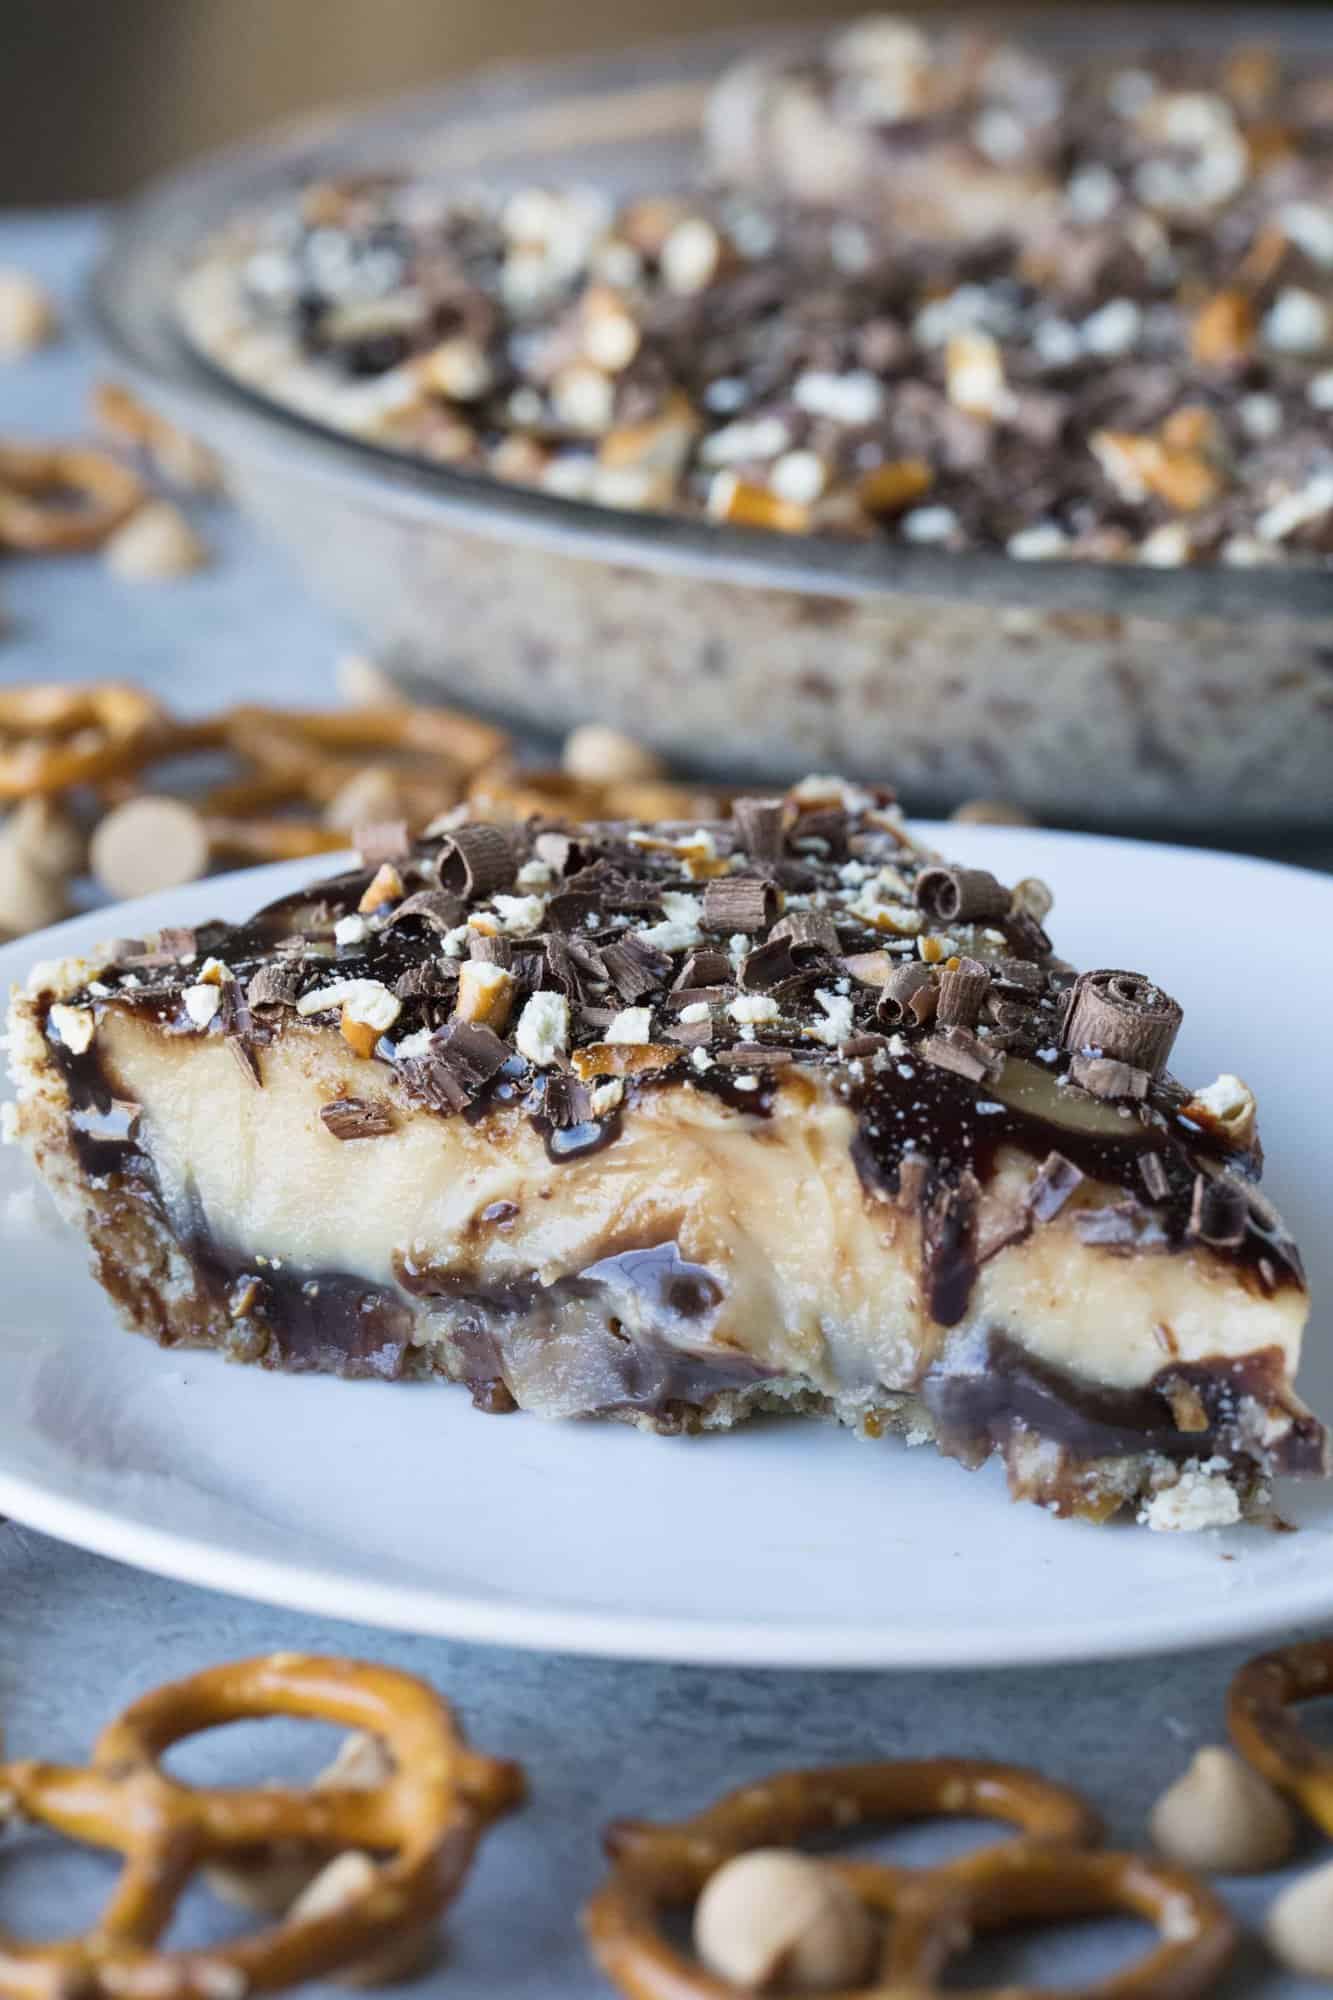 Get ready for a pie that will change your life! Peanut Butter Hot Fudge Pie with Pretzel Crust is sure to be a family favorite!